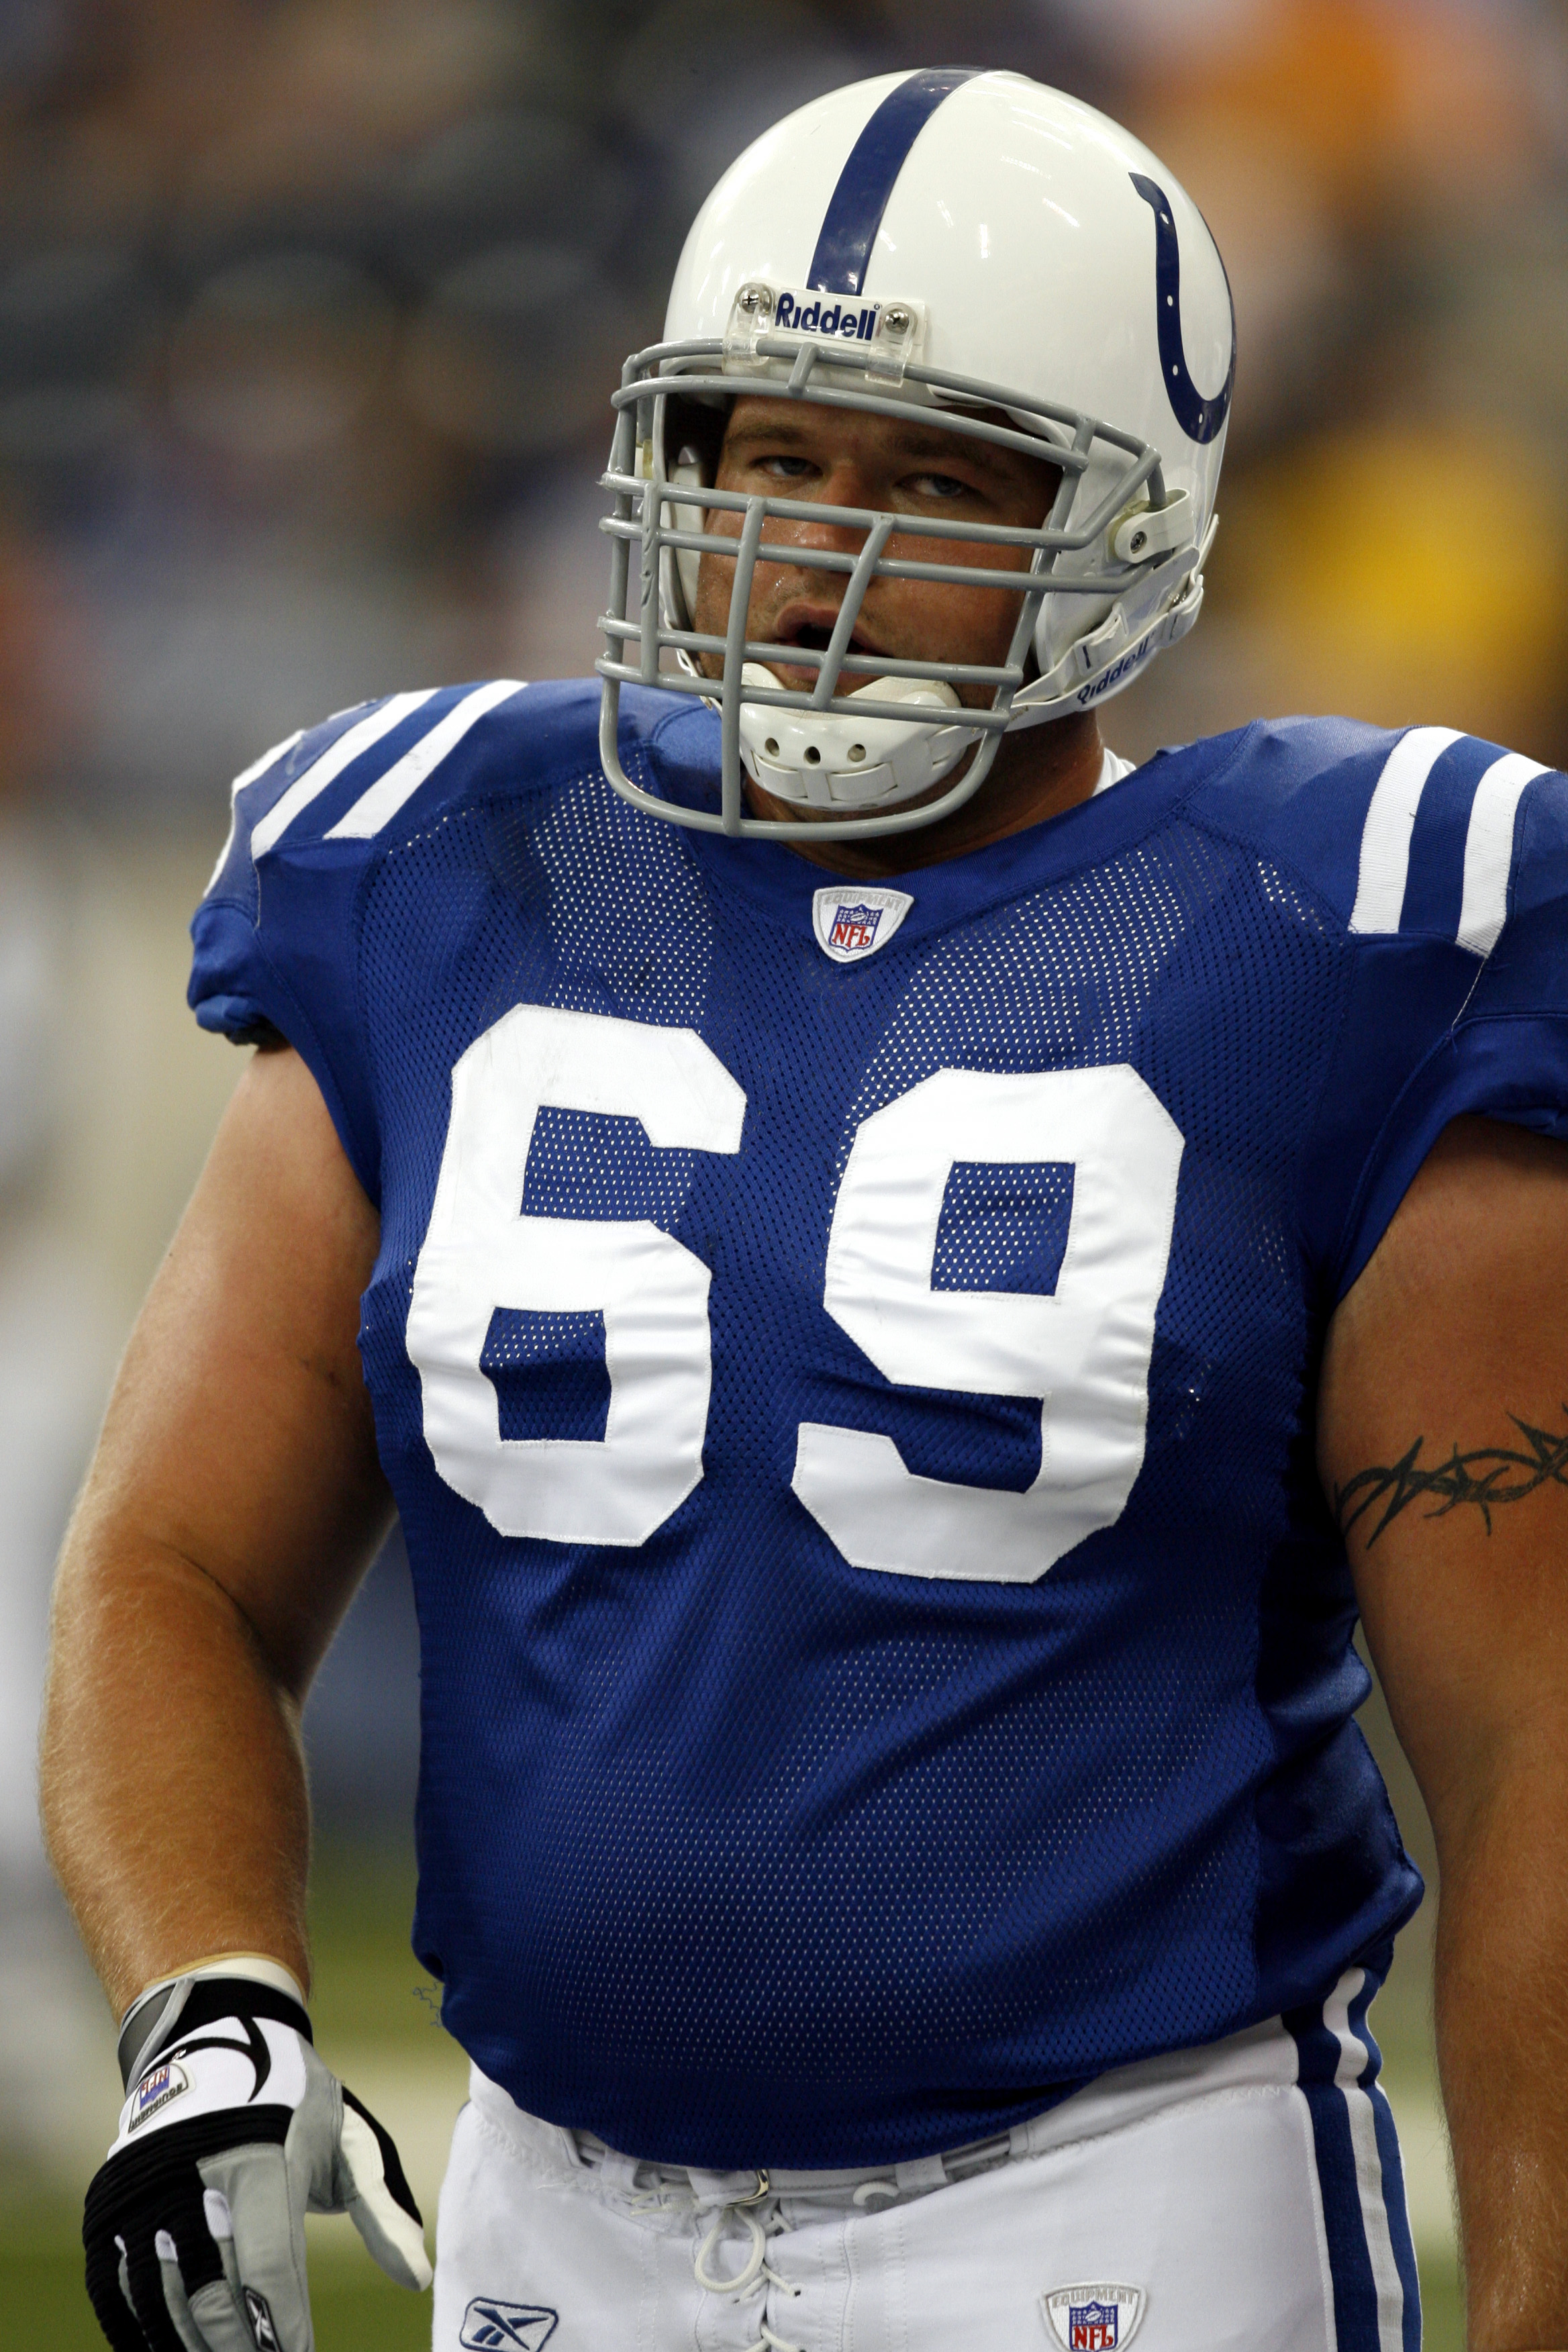 Matt Ulirch of the Indianapolis Colts during their game against the Houston Texans at the RCA Dome on September 17, 2006 | Source: Getty Images